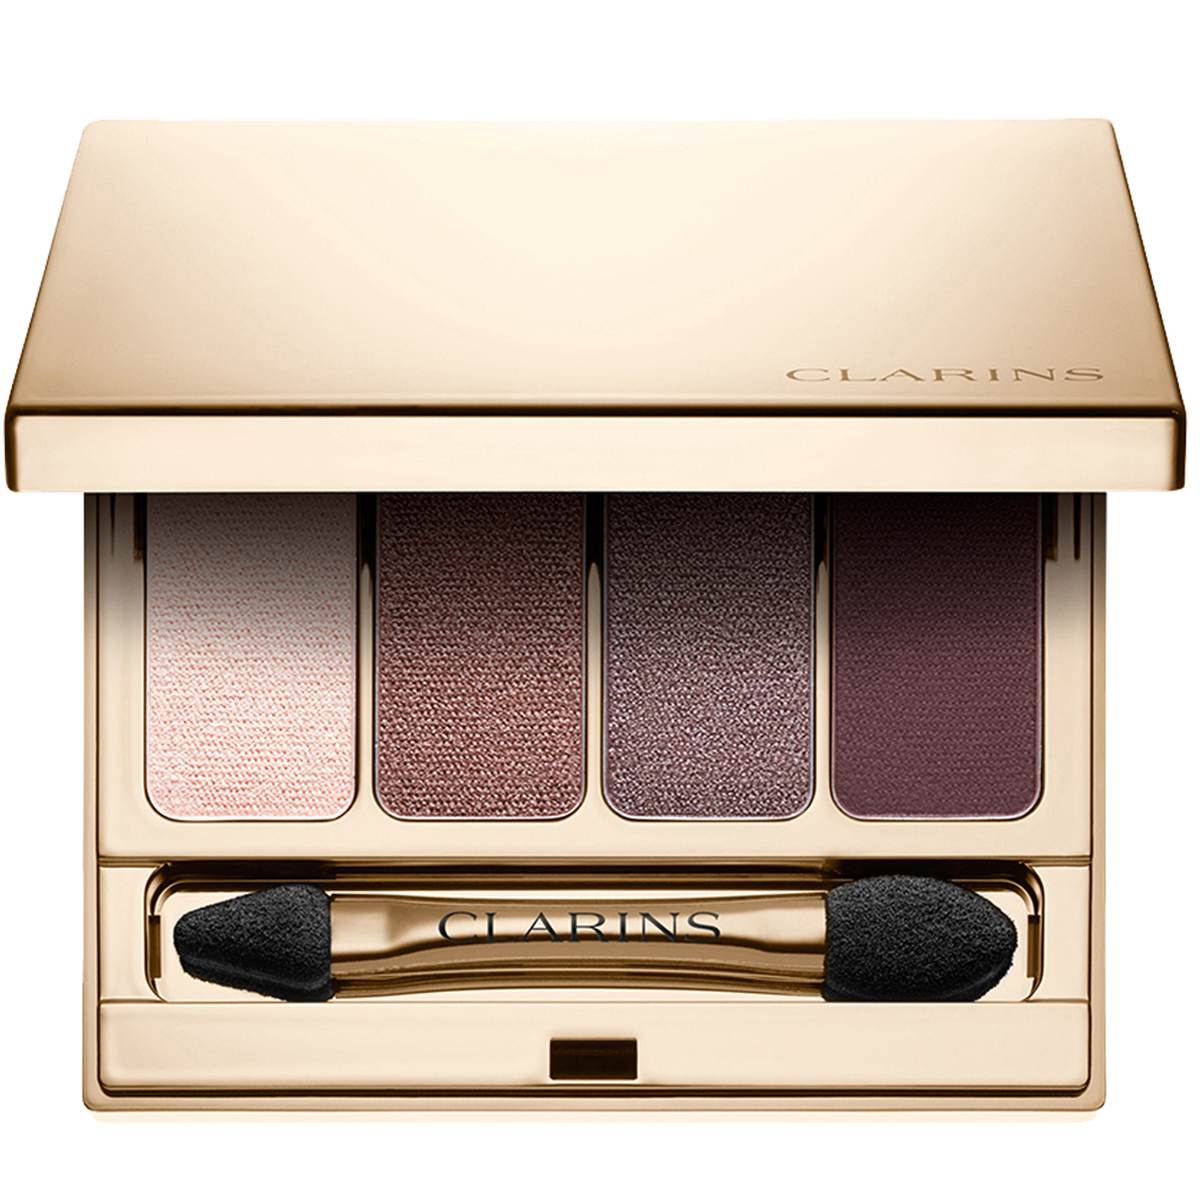 Clarins 4 Colour Eyeshadow Palette 02 Rosewood